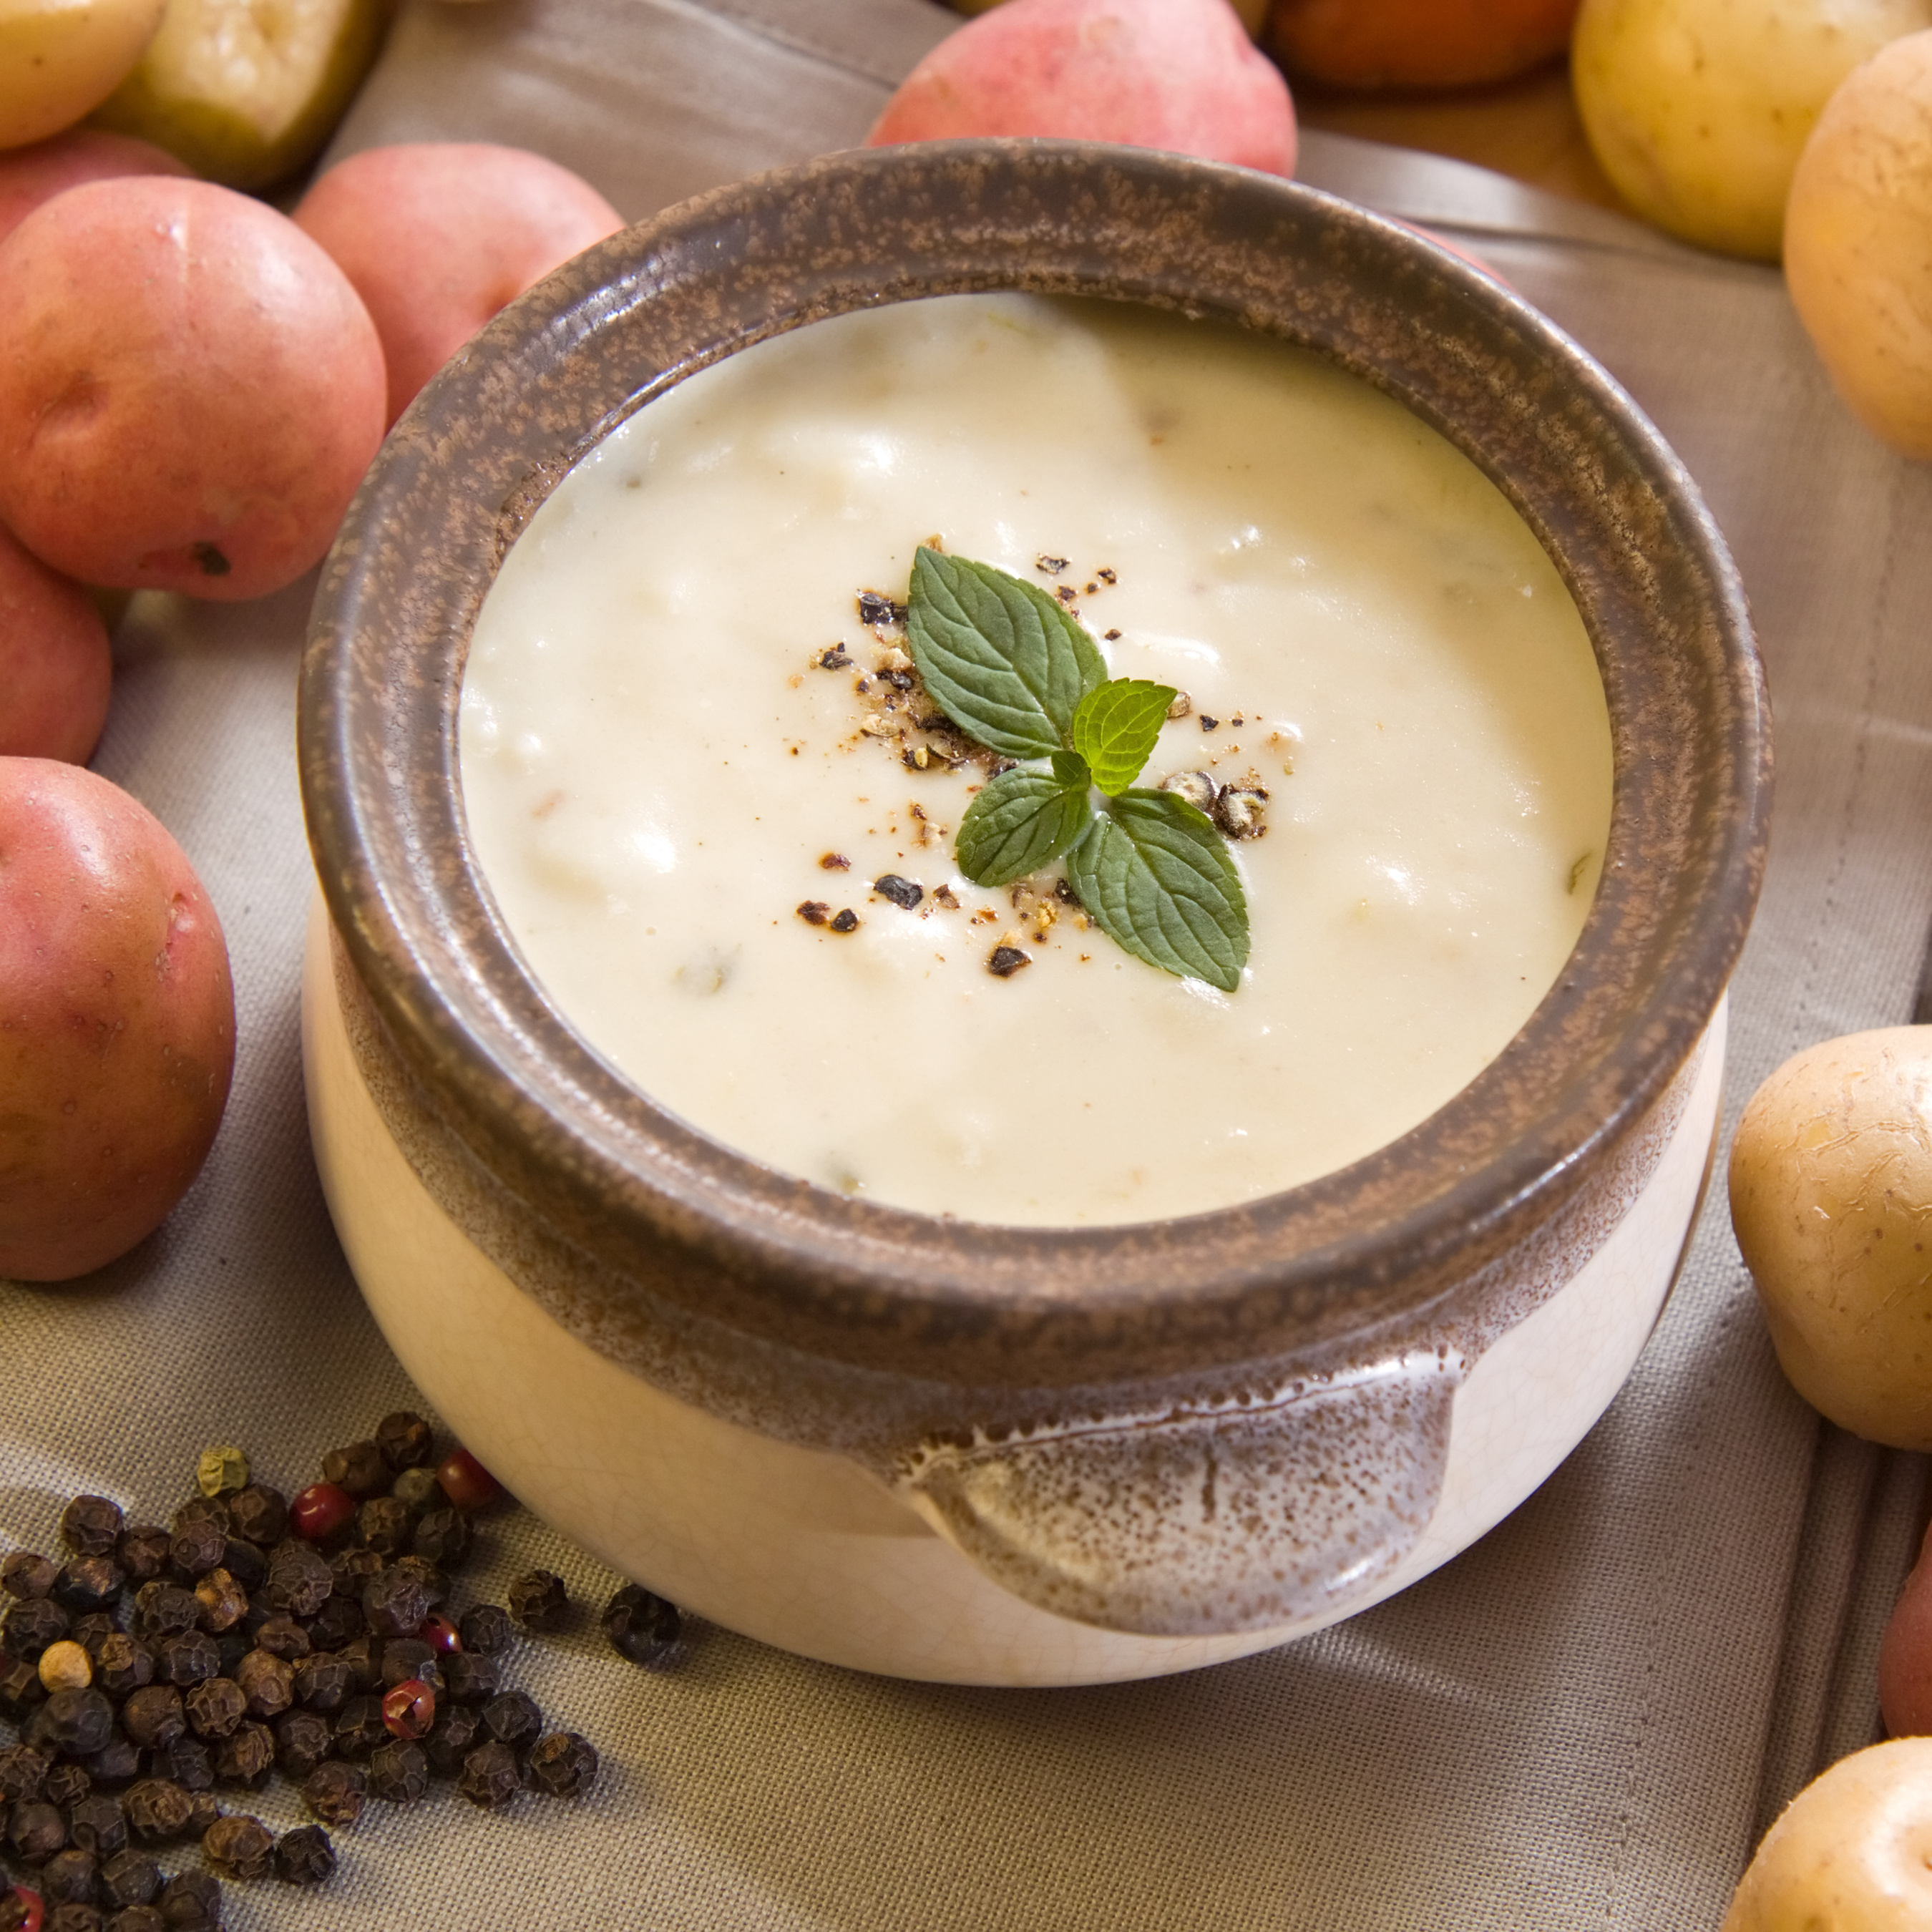 A bowl of freshly made creamy potato soup garnished with mint